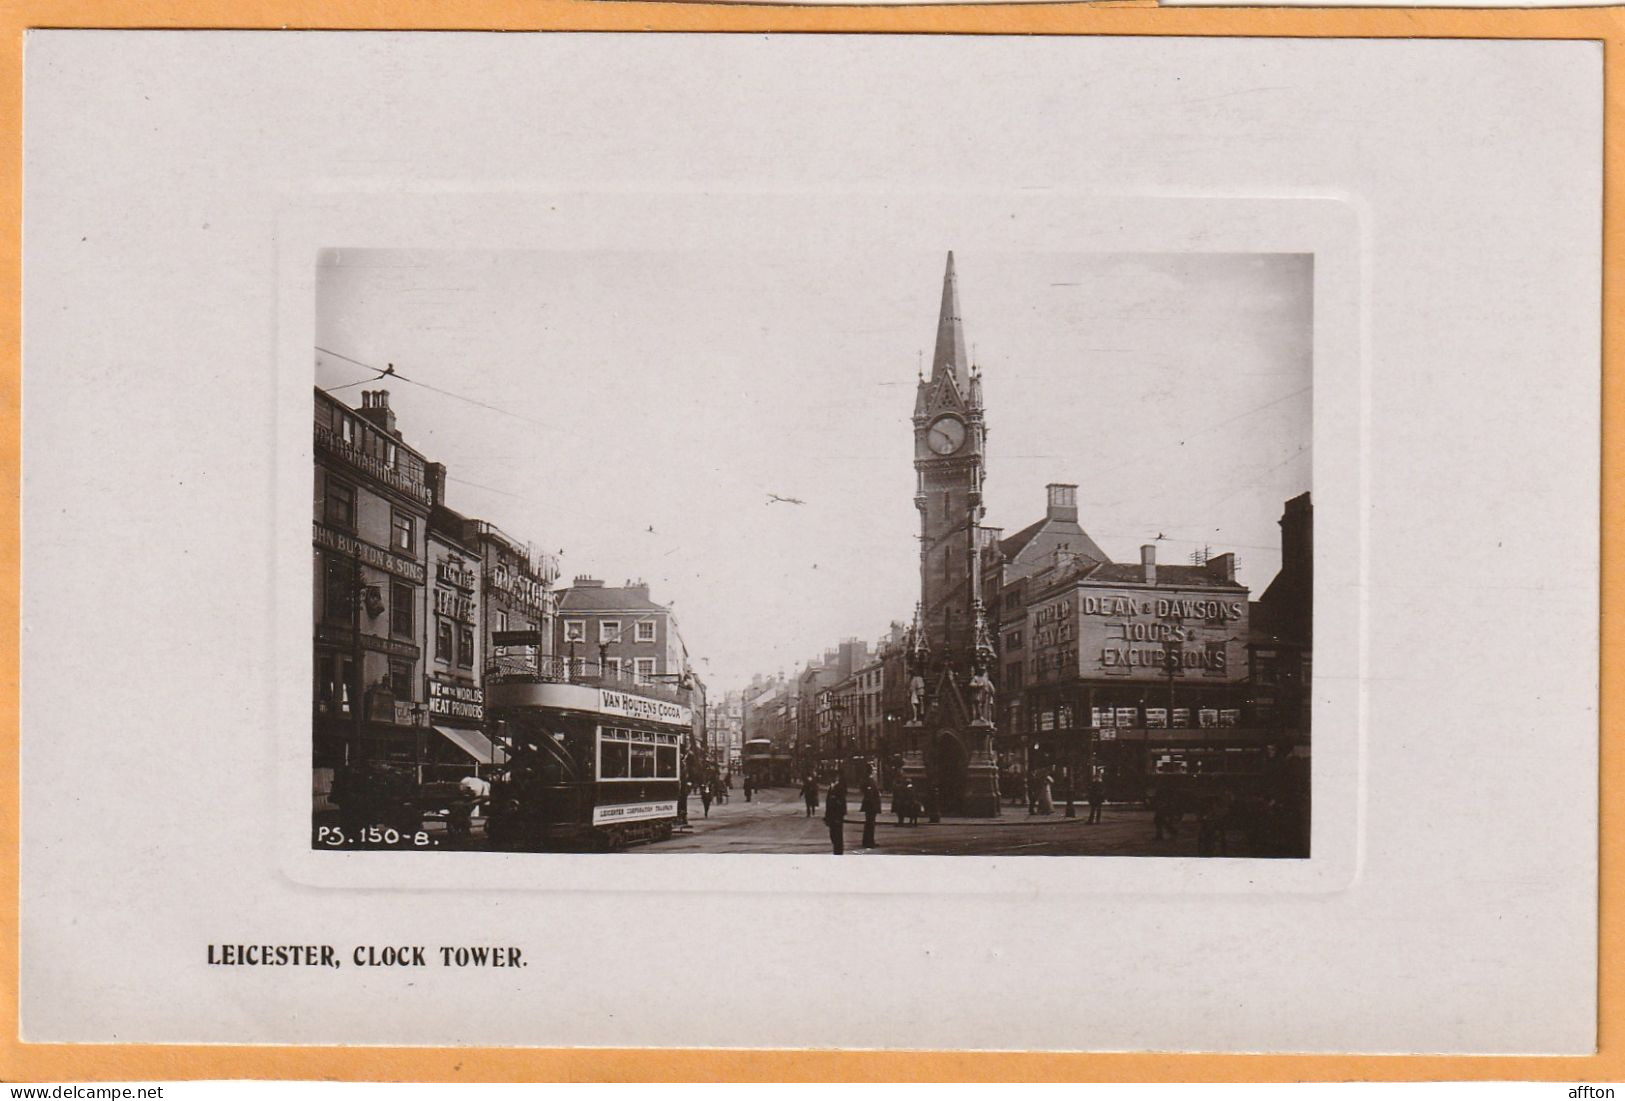 Leicester UK 1906 Postcard - Leicester